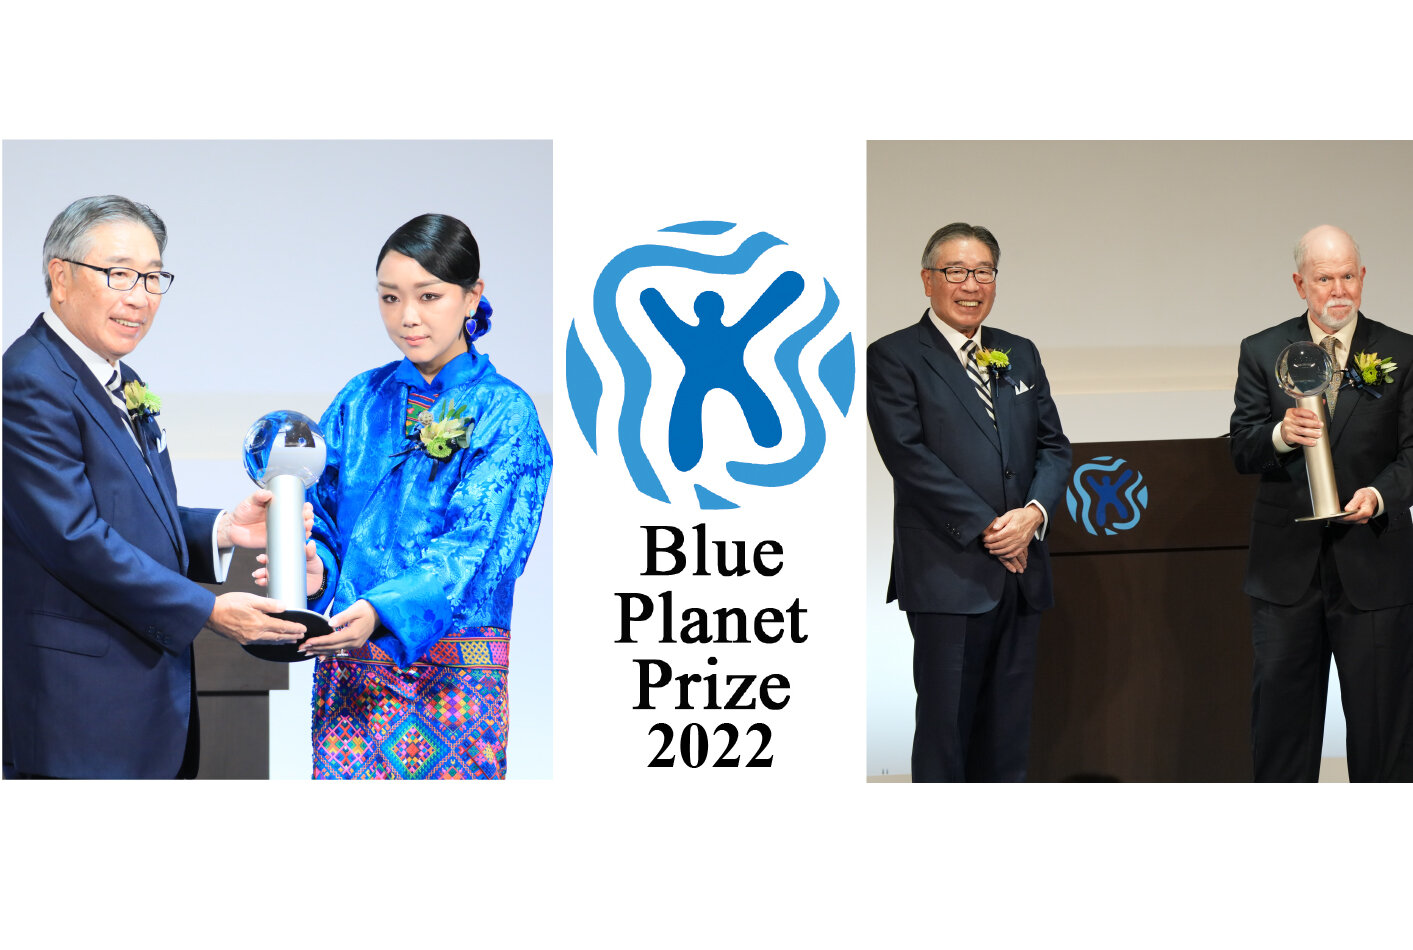 2022 Blue Planet Prize Award Ceremony and Commemorative Lectures were held